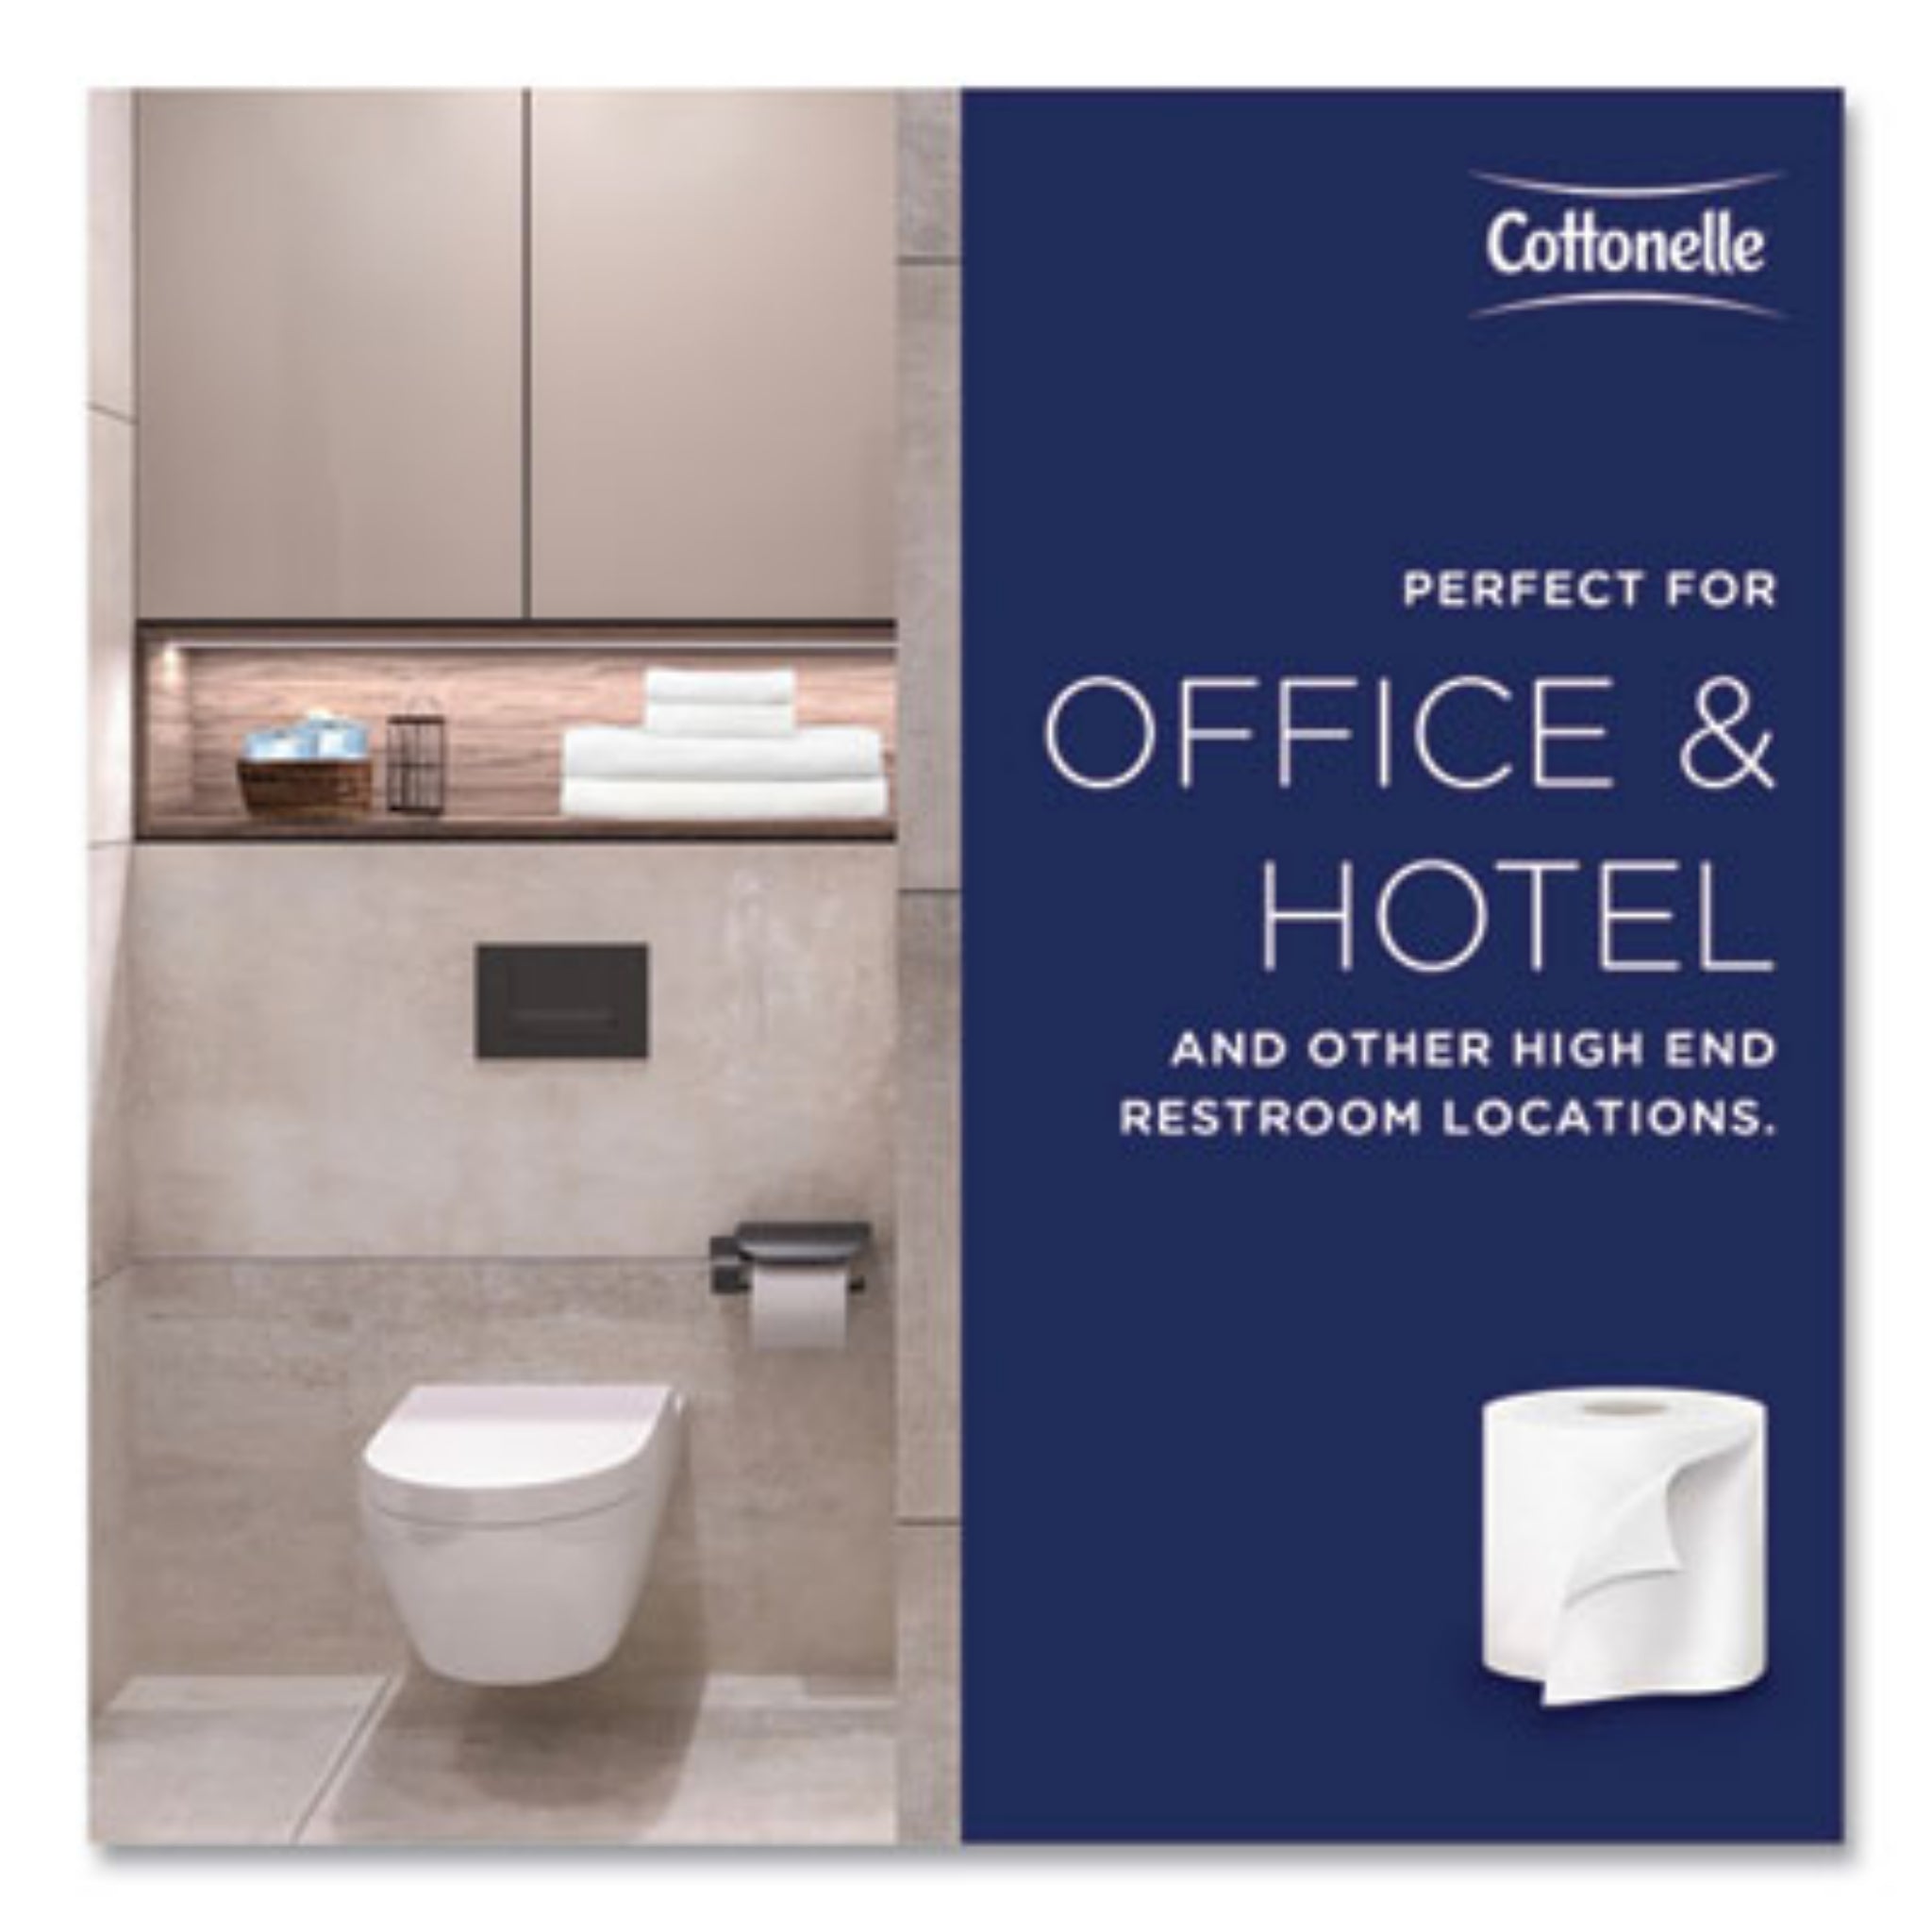 KIMBERLY-CLARK Cottonelle 17713 2-Ply Bathroom Tissue for Business, Office & Hotel